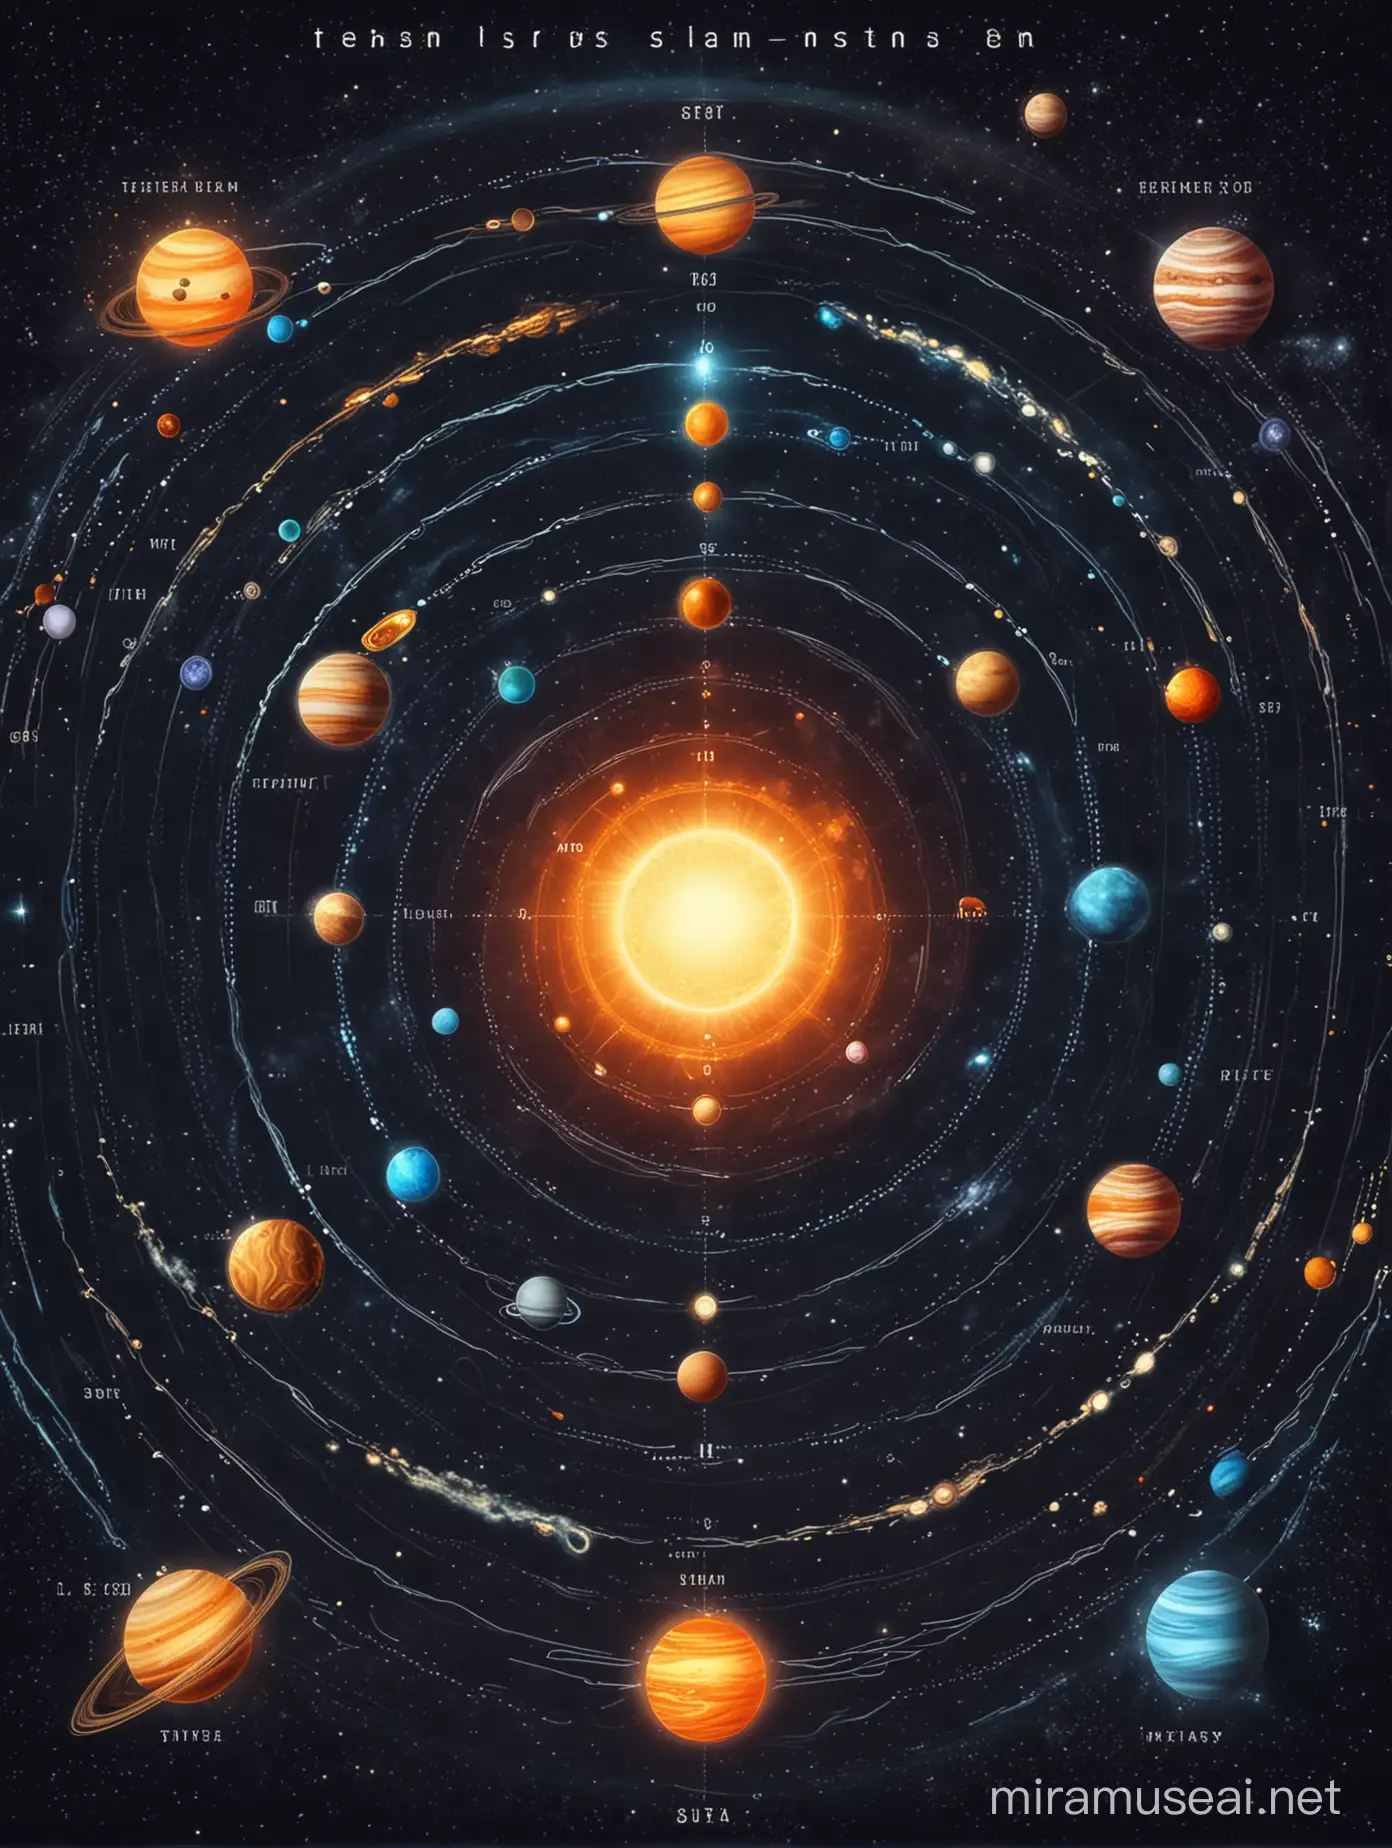 Futuristic Map of a Solar System with One Star and Ten Planets